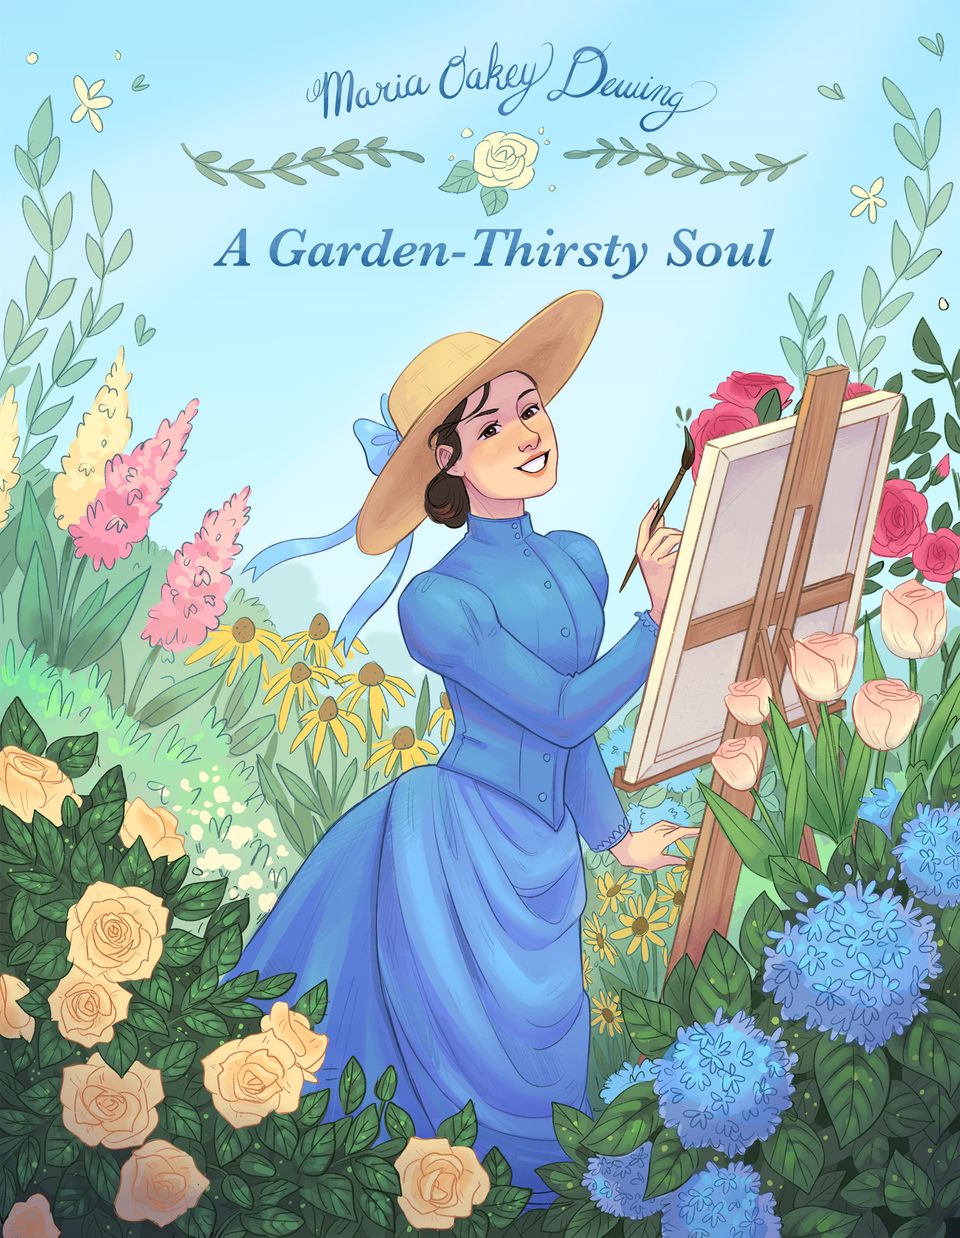 A Garden-Thirsty Soul: A Comic about Maria Oakey Dewing, cover